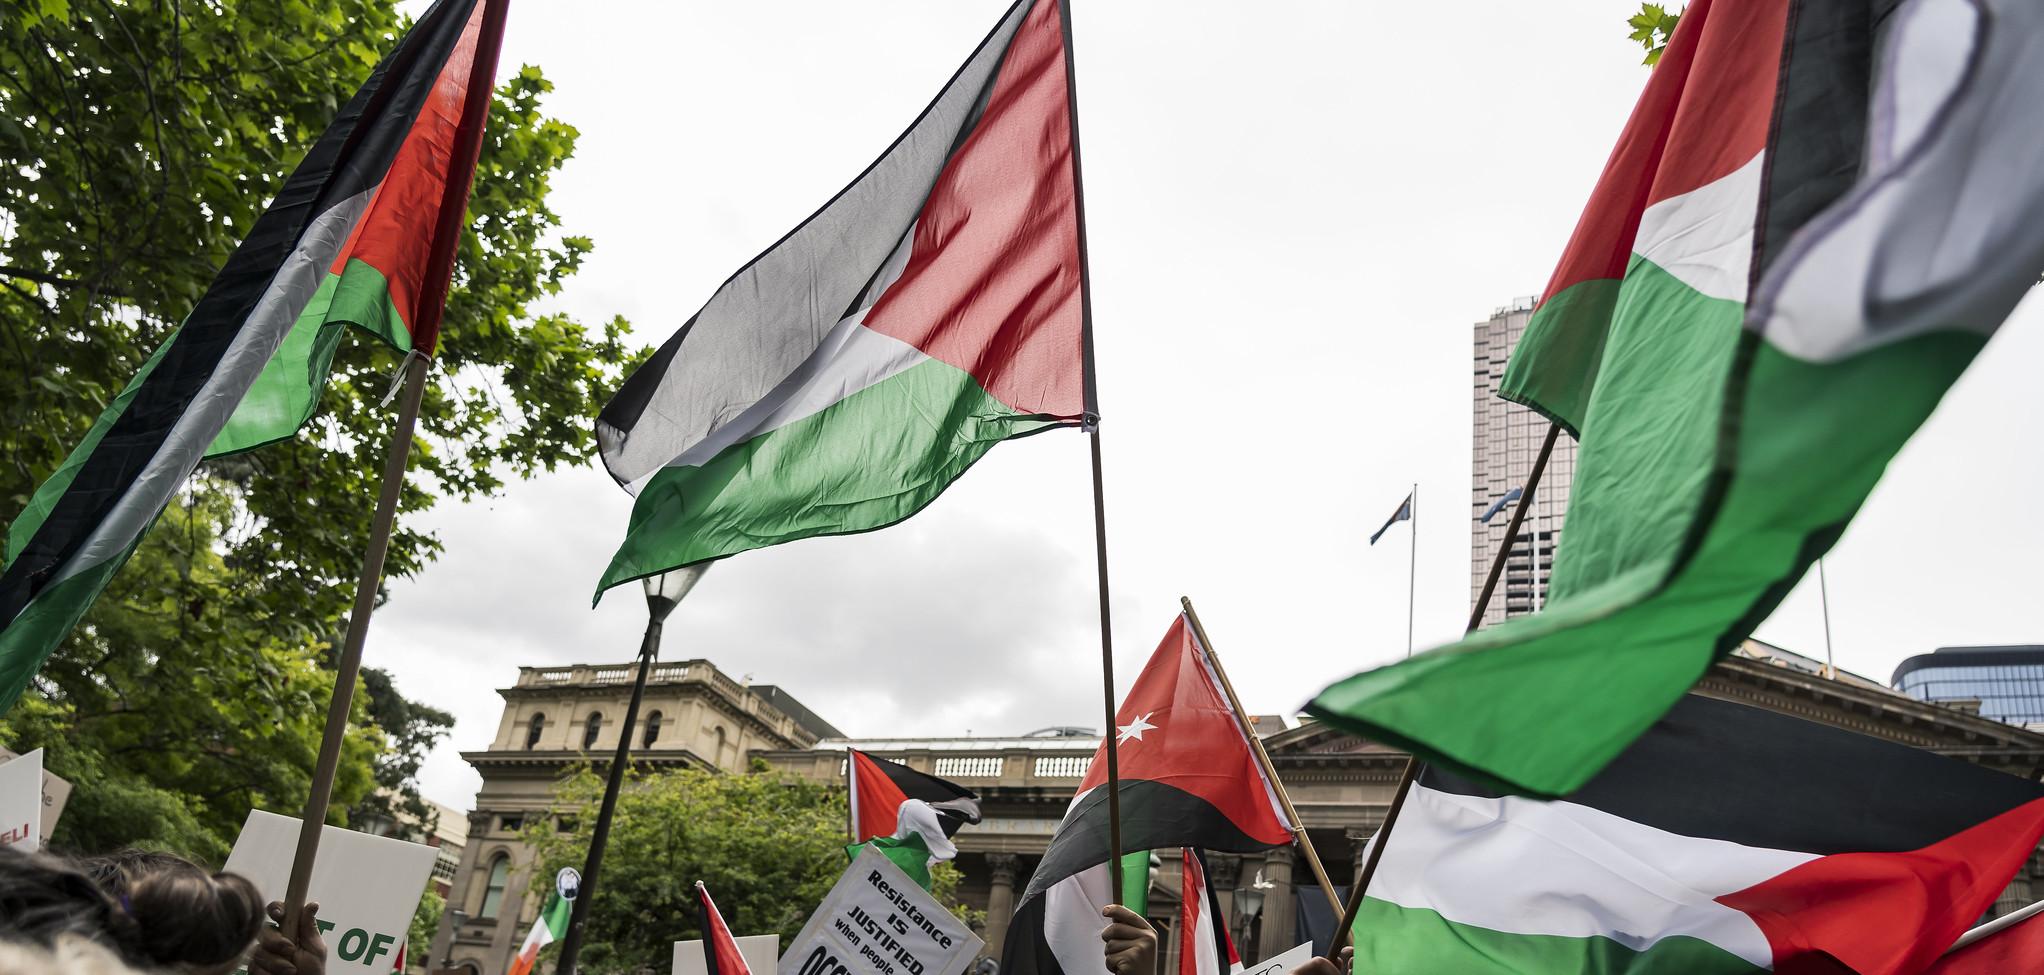 People protesting, waving red, white, and green Palestine flags in the air.